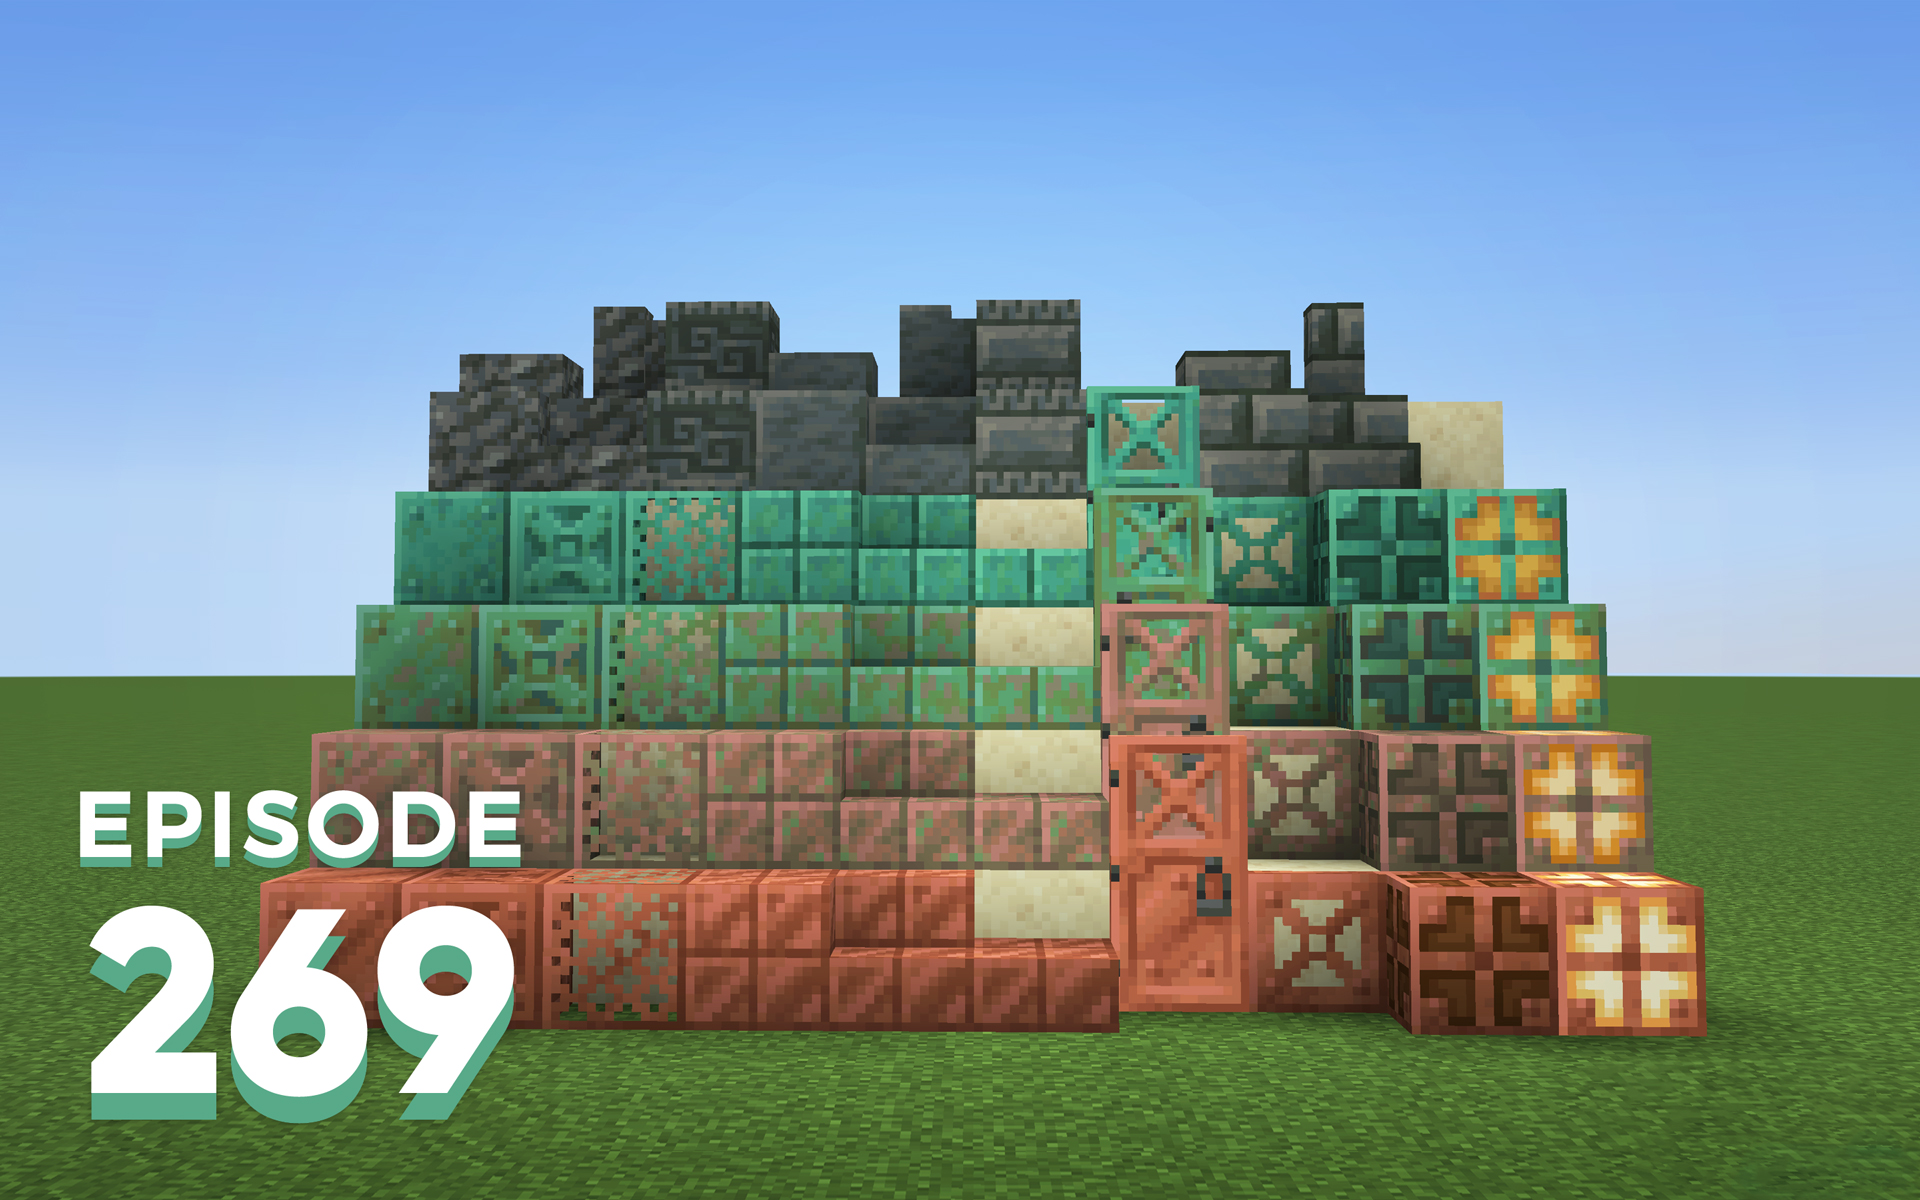 The Spawn Chunks 269: Expanding Tuff And Copper Blocks